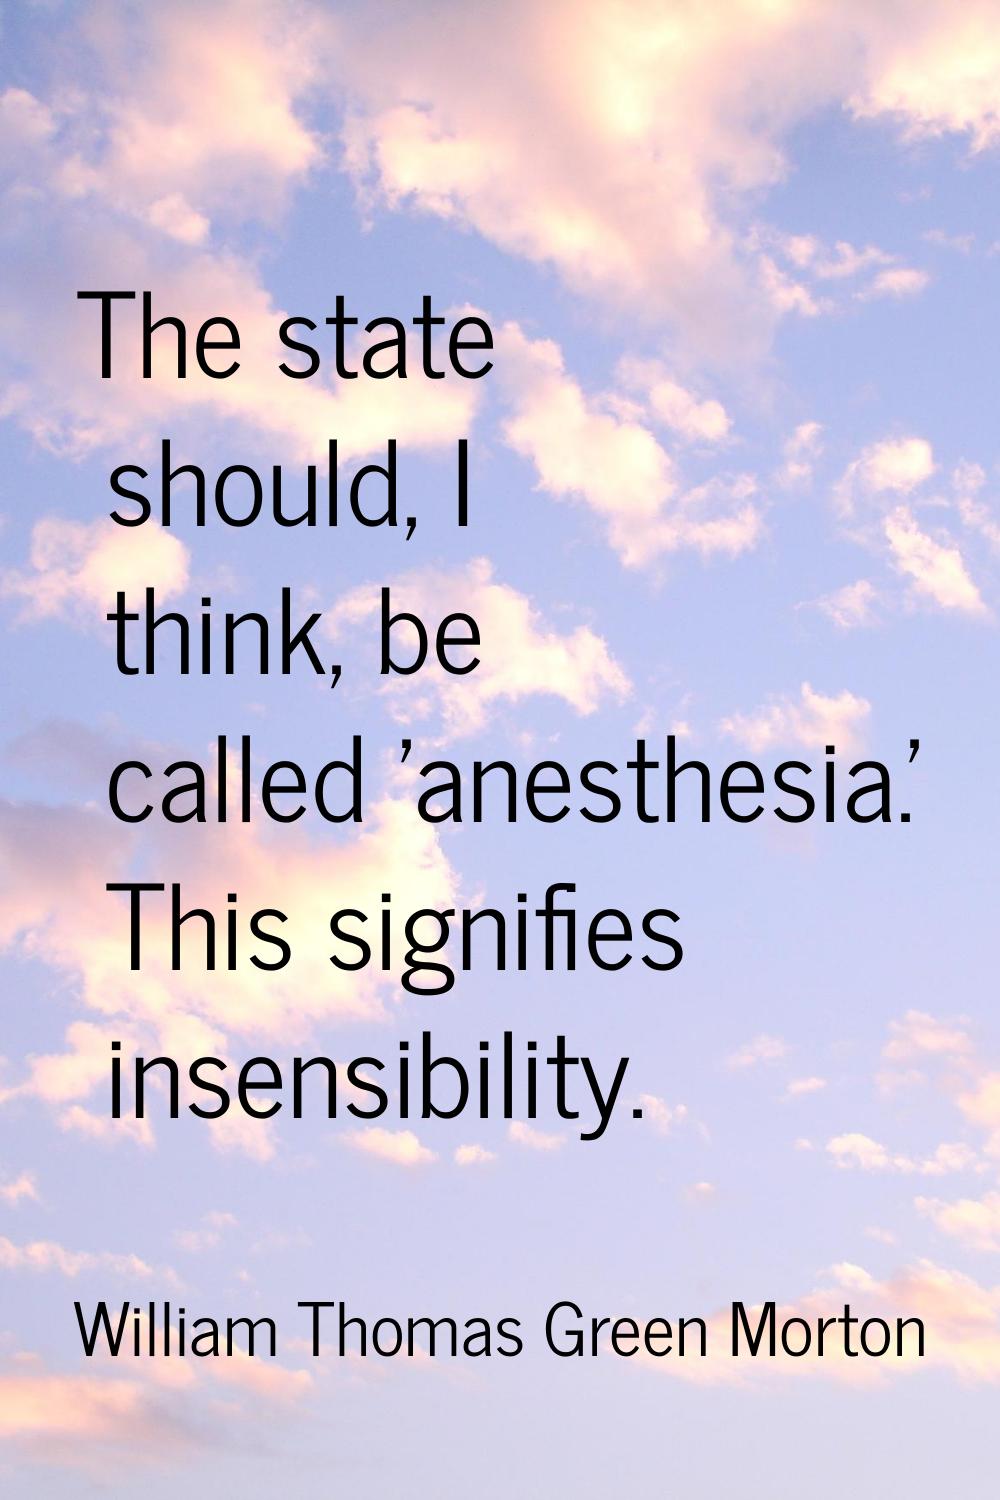 The state should, I think, be called 'anesthesia.' This signifies insensibility.